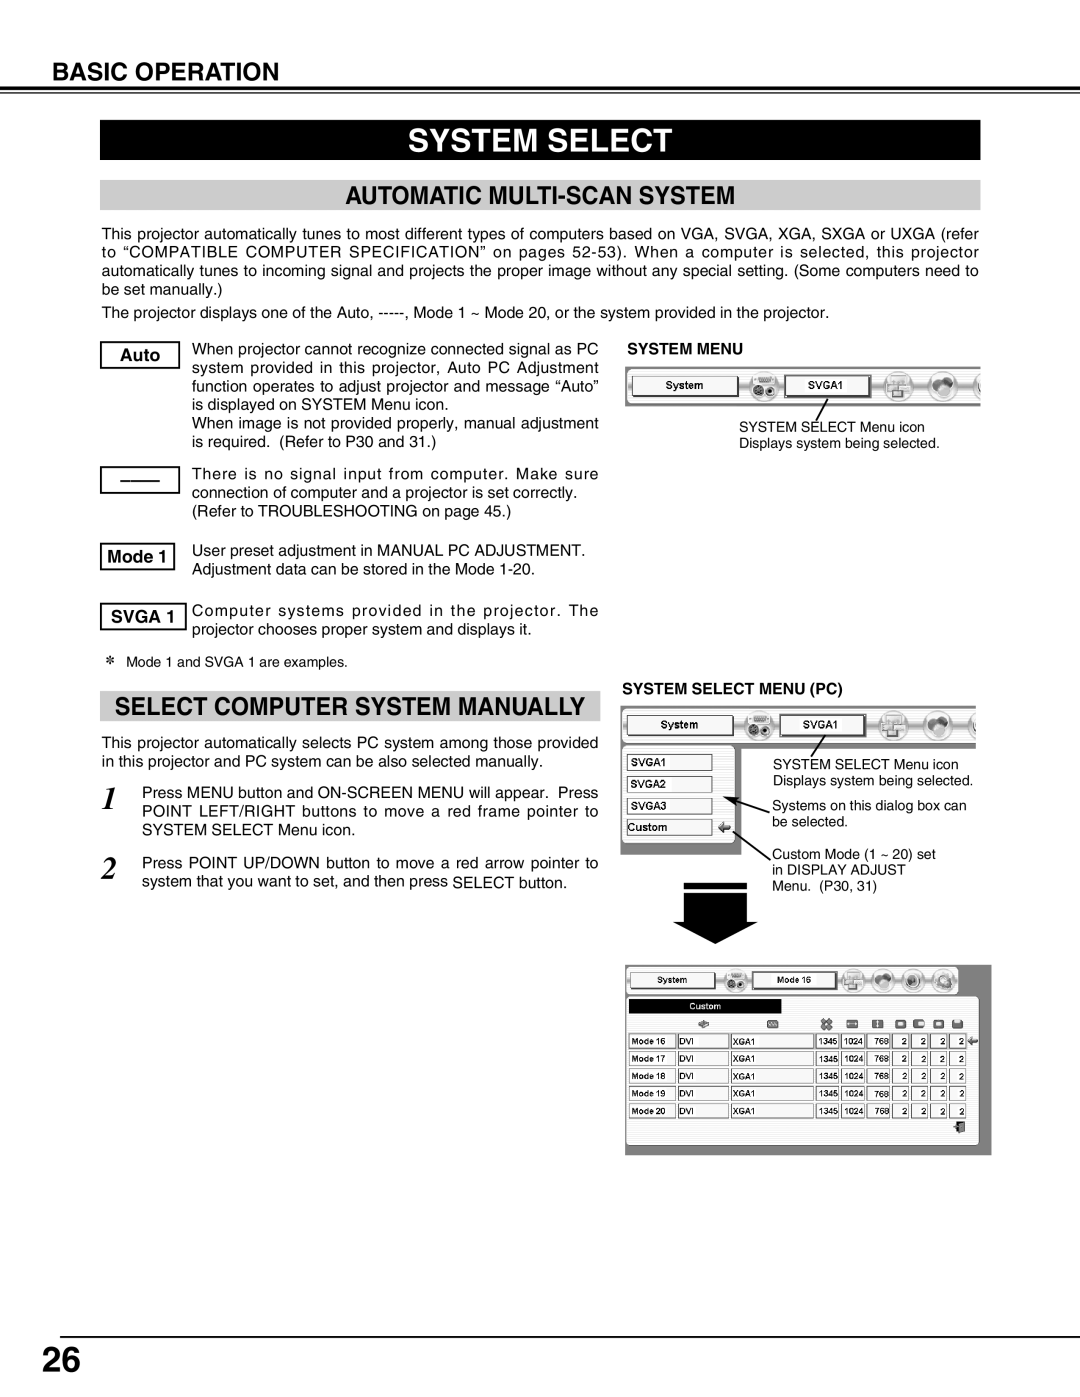 Sanyo PLV-HD150 owner manual System Select, Basic Operation, Automatic Multi-Scansystem, Select Computer System Manually 